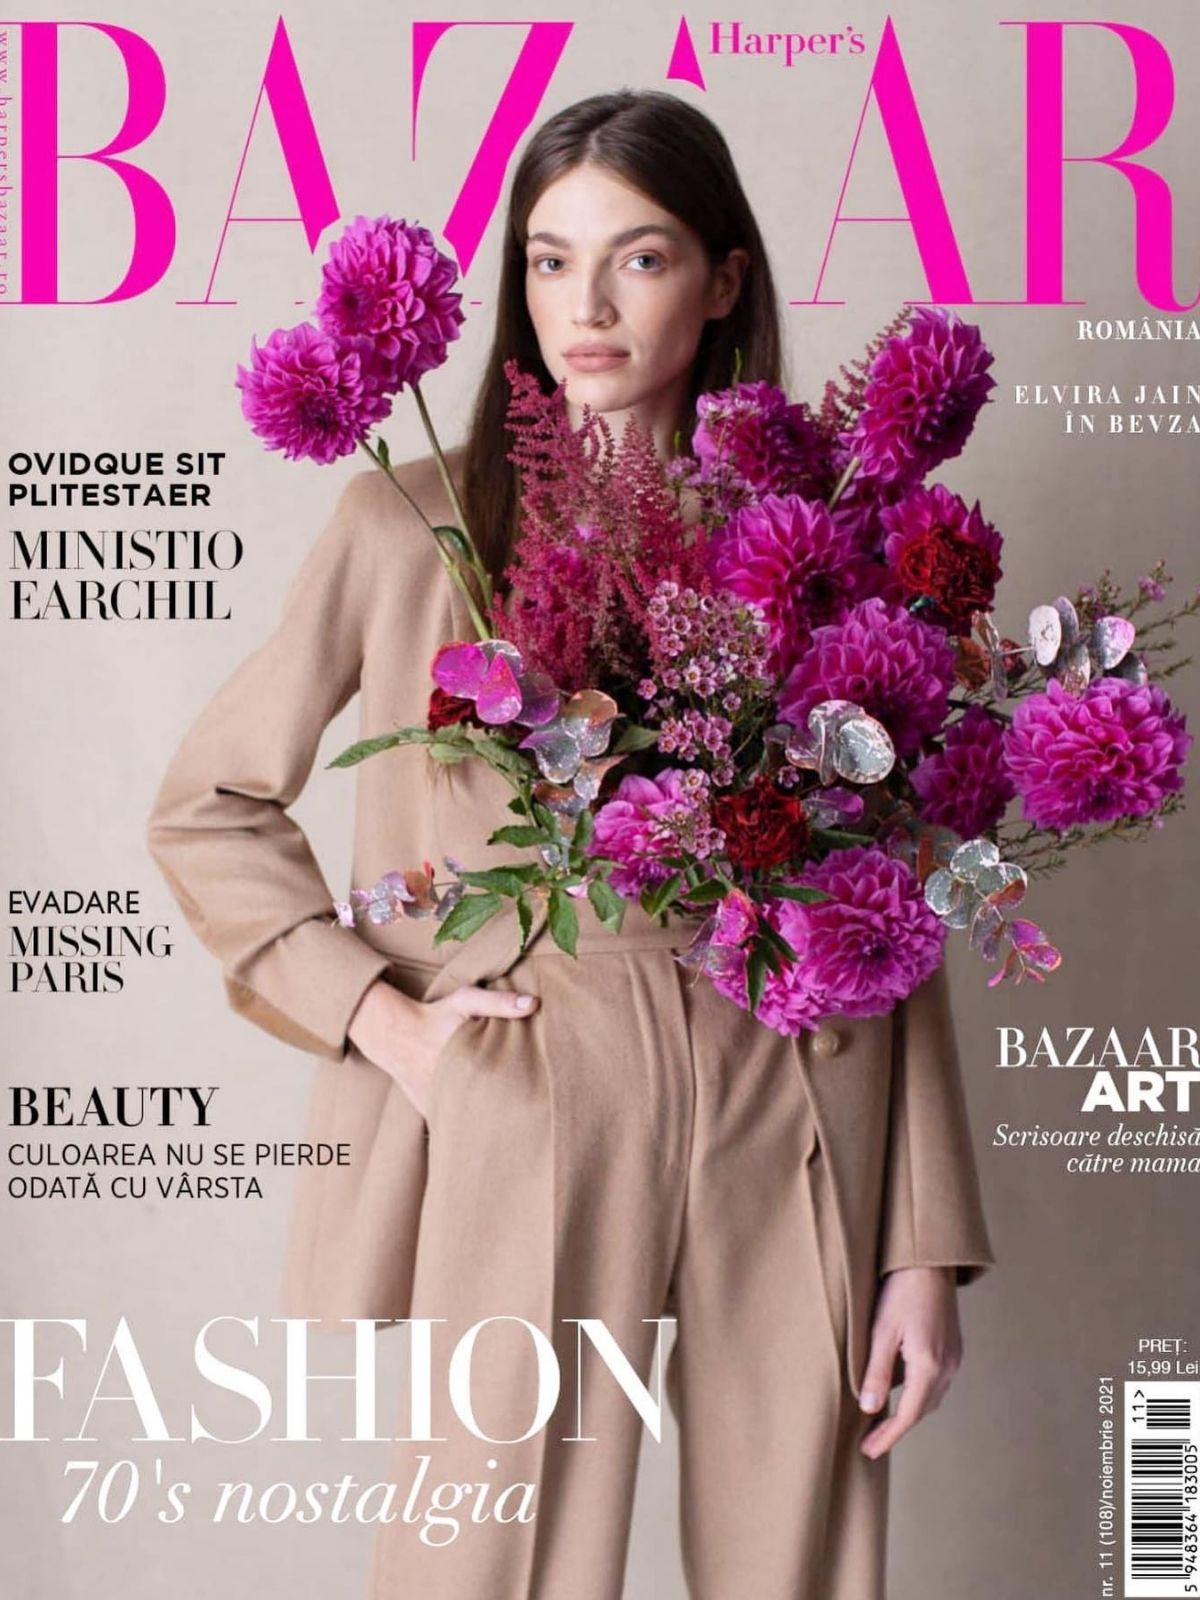 Nicu Bocancea Designs for the Cover of Bazaar - Article on Thursd (13)